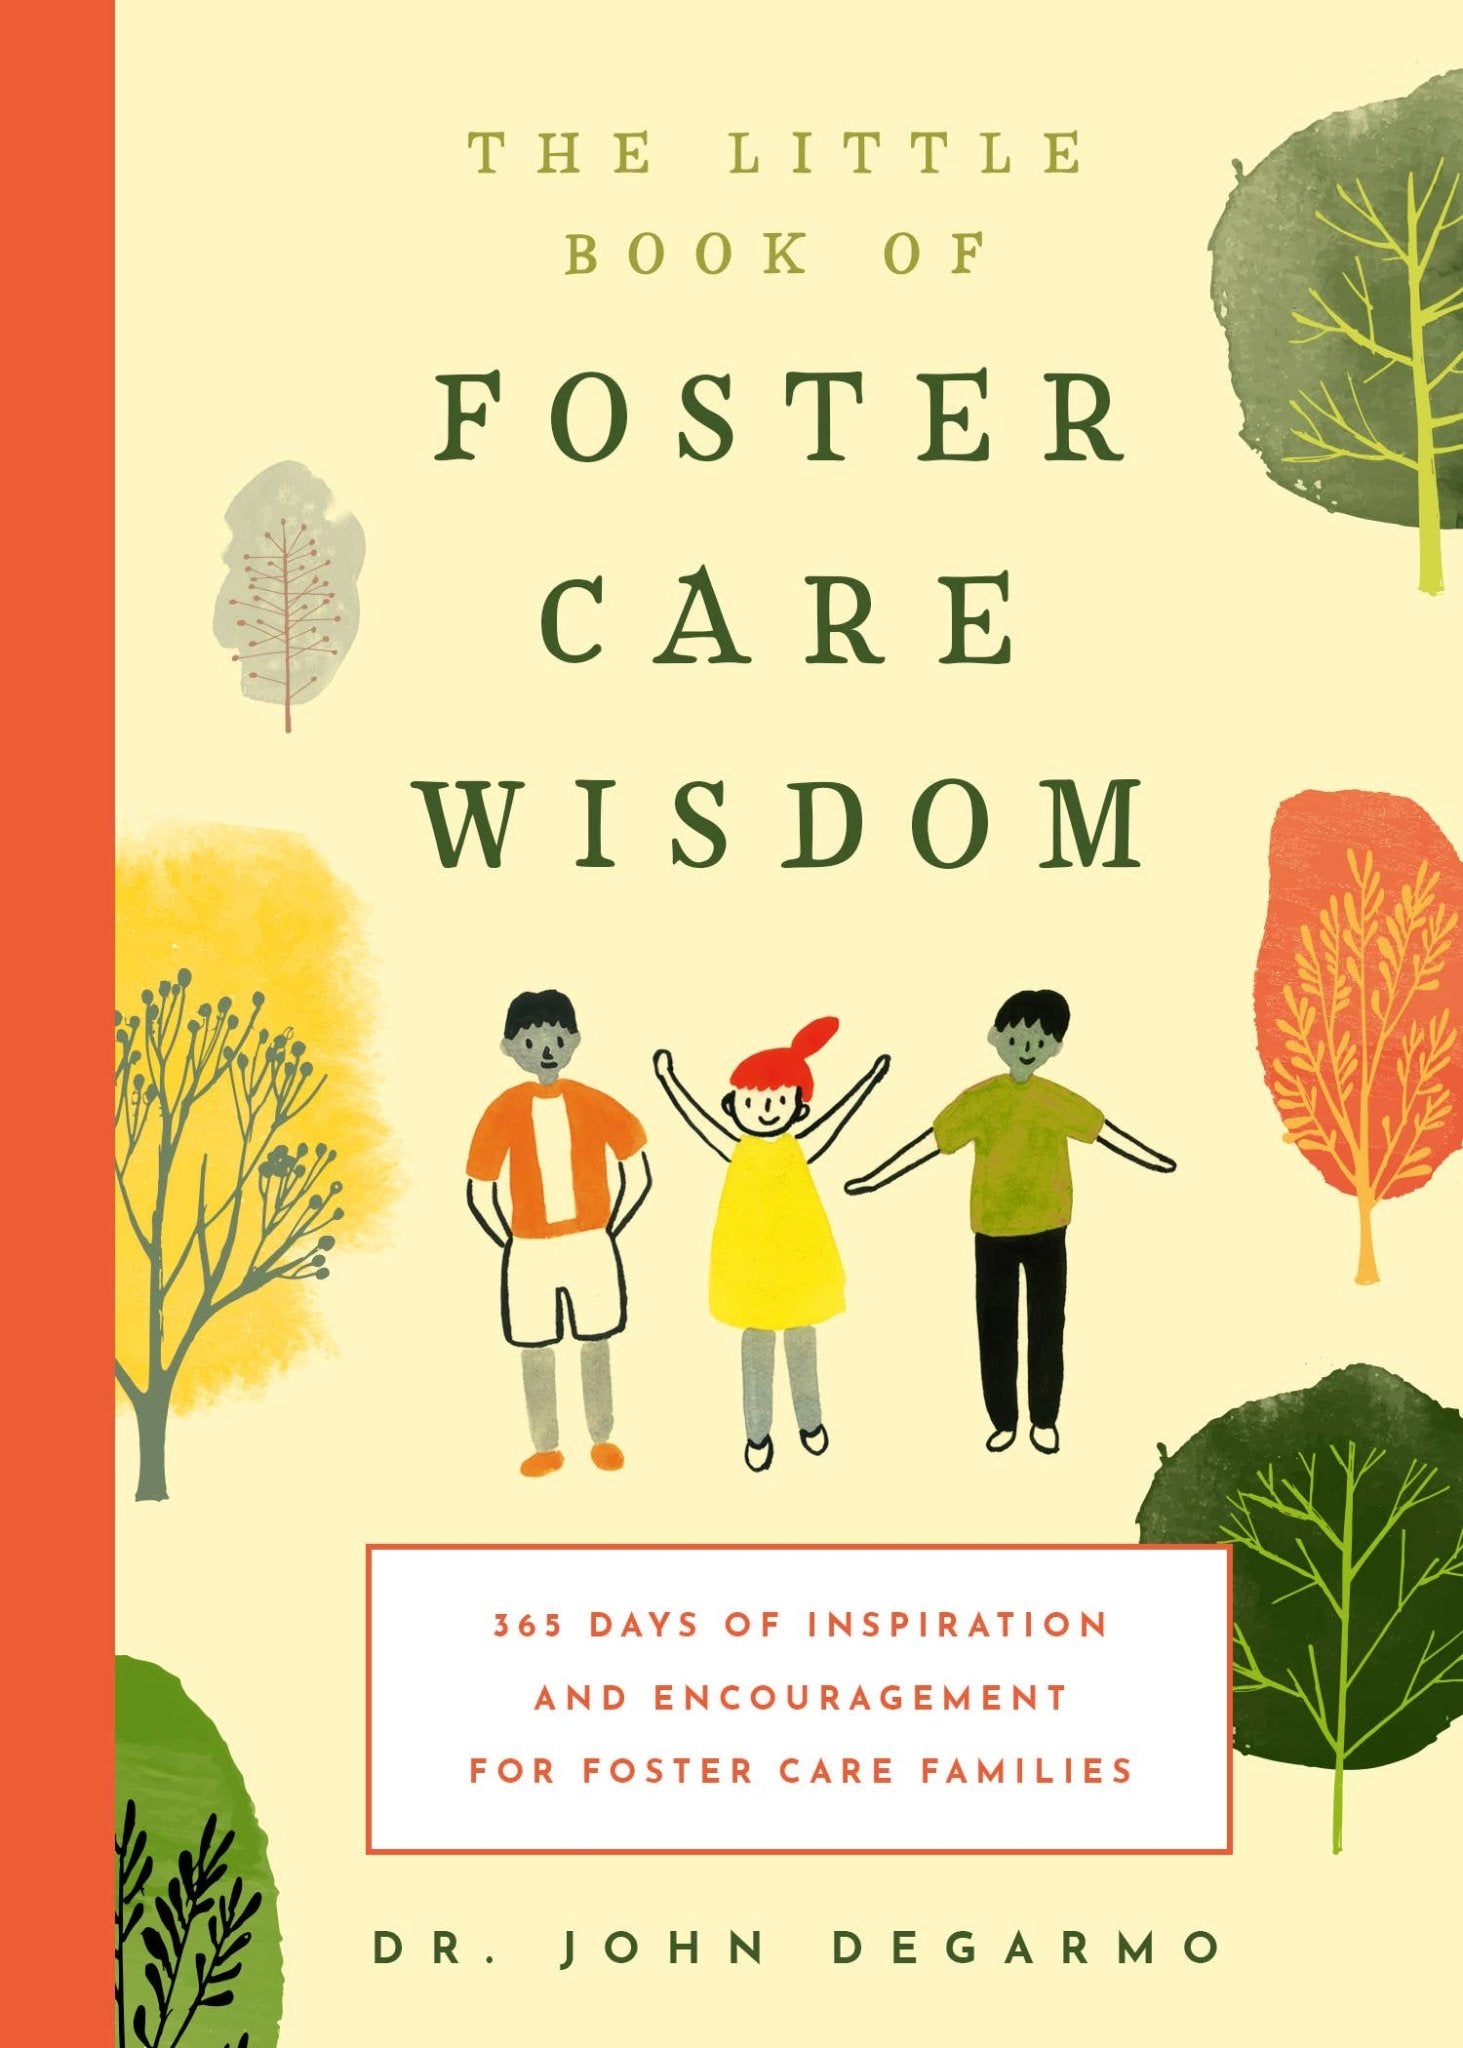 The Little Book of Foster Care Wisdom - Spiral Circle